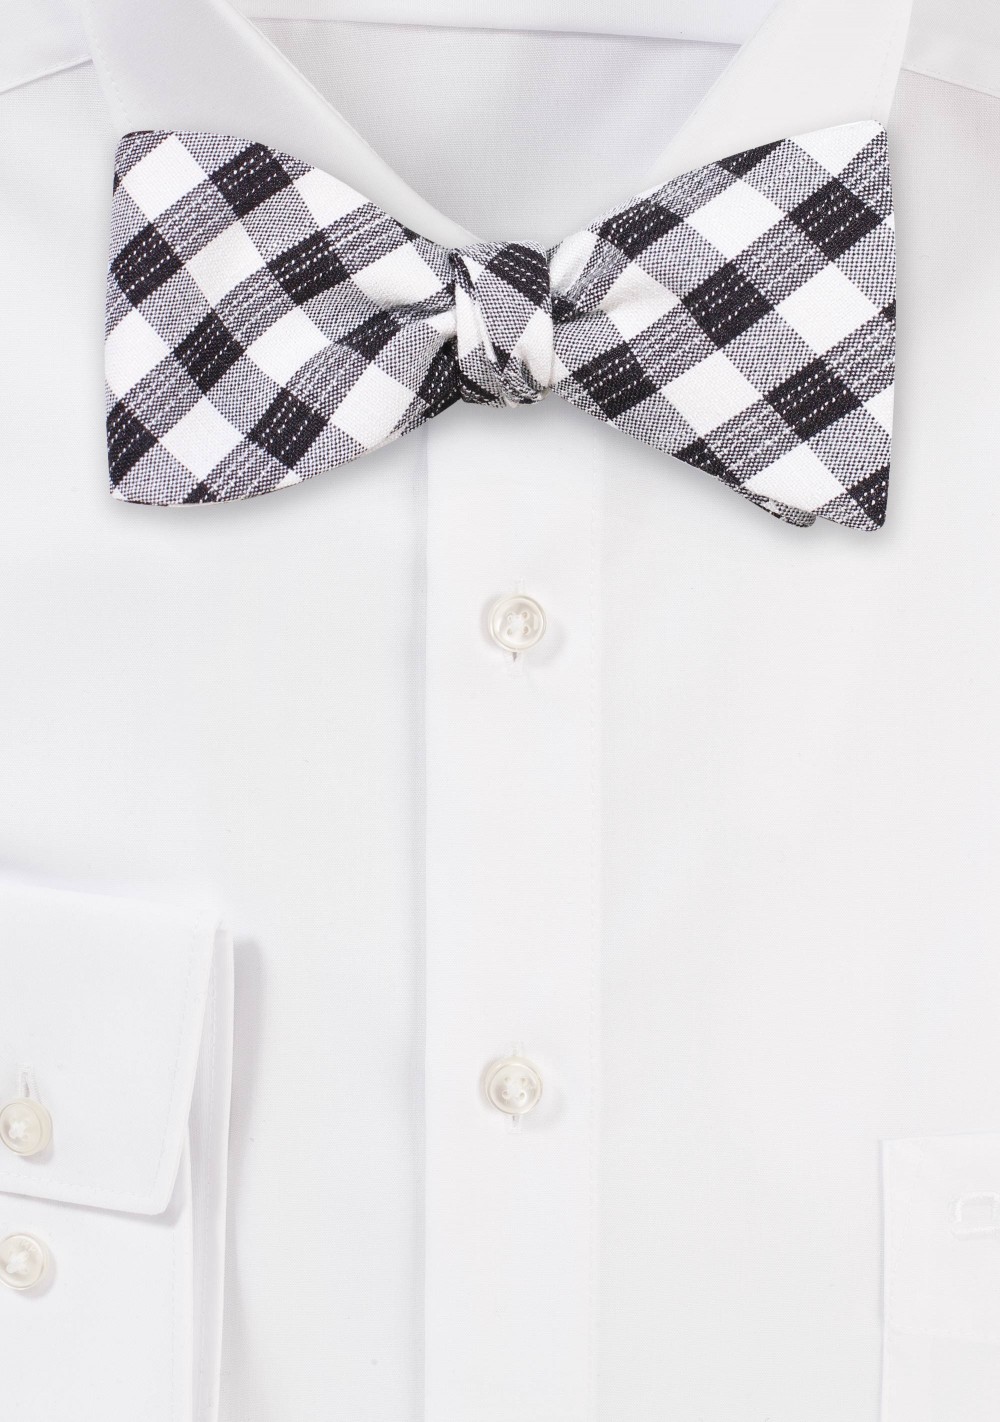 Gingham Check Bowtie in Navy and Tan